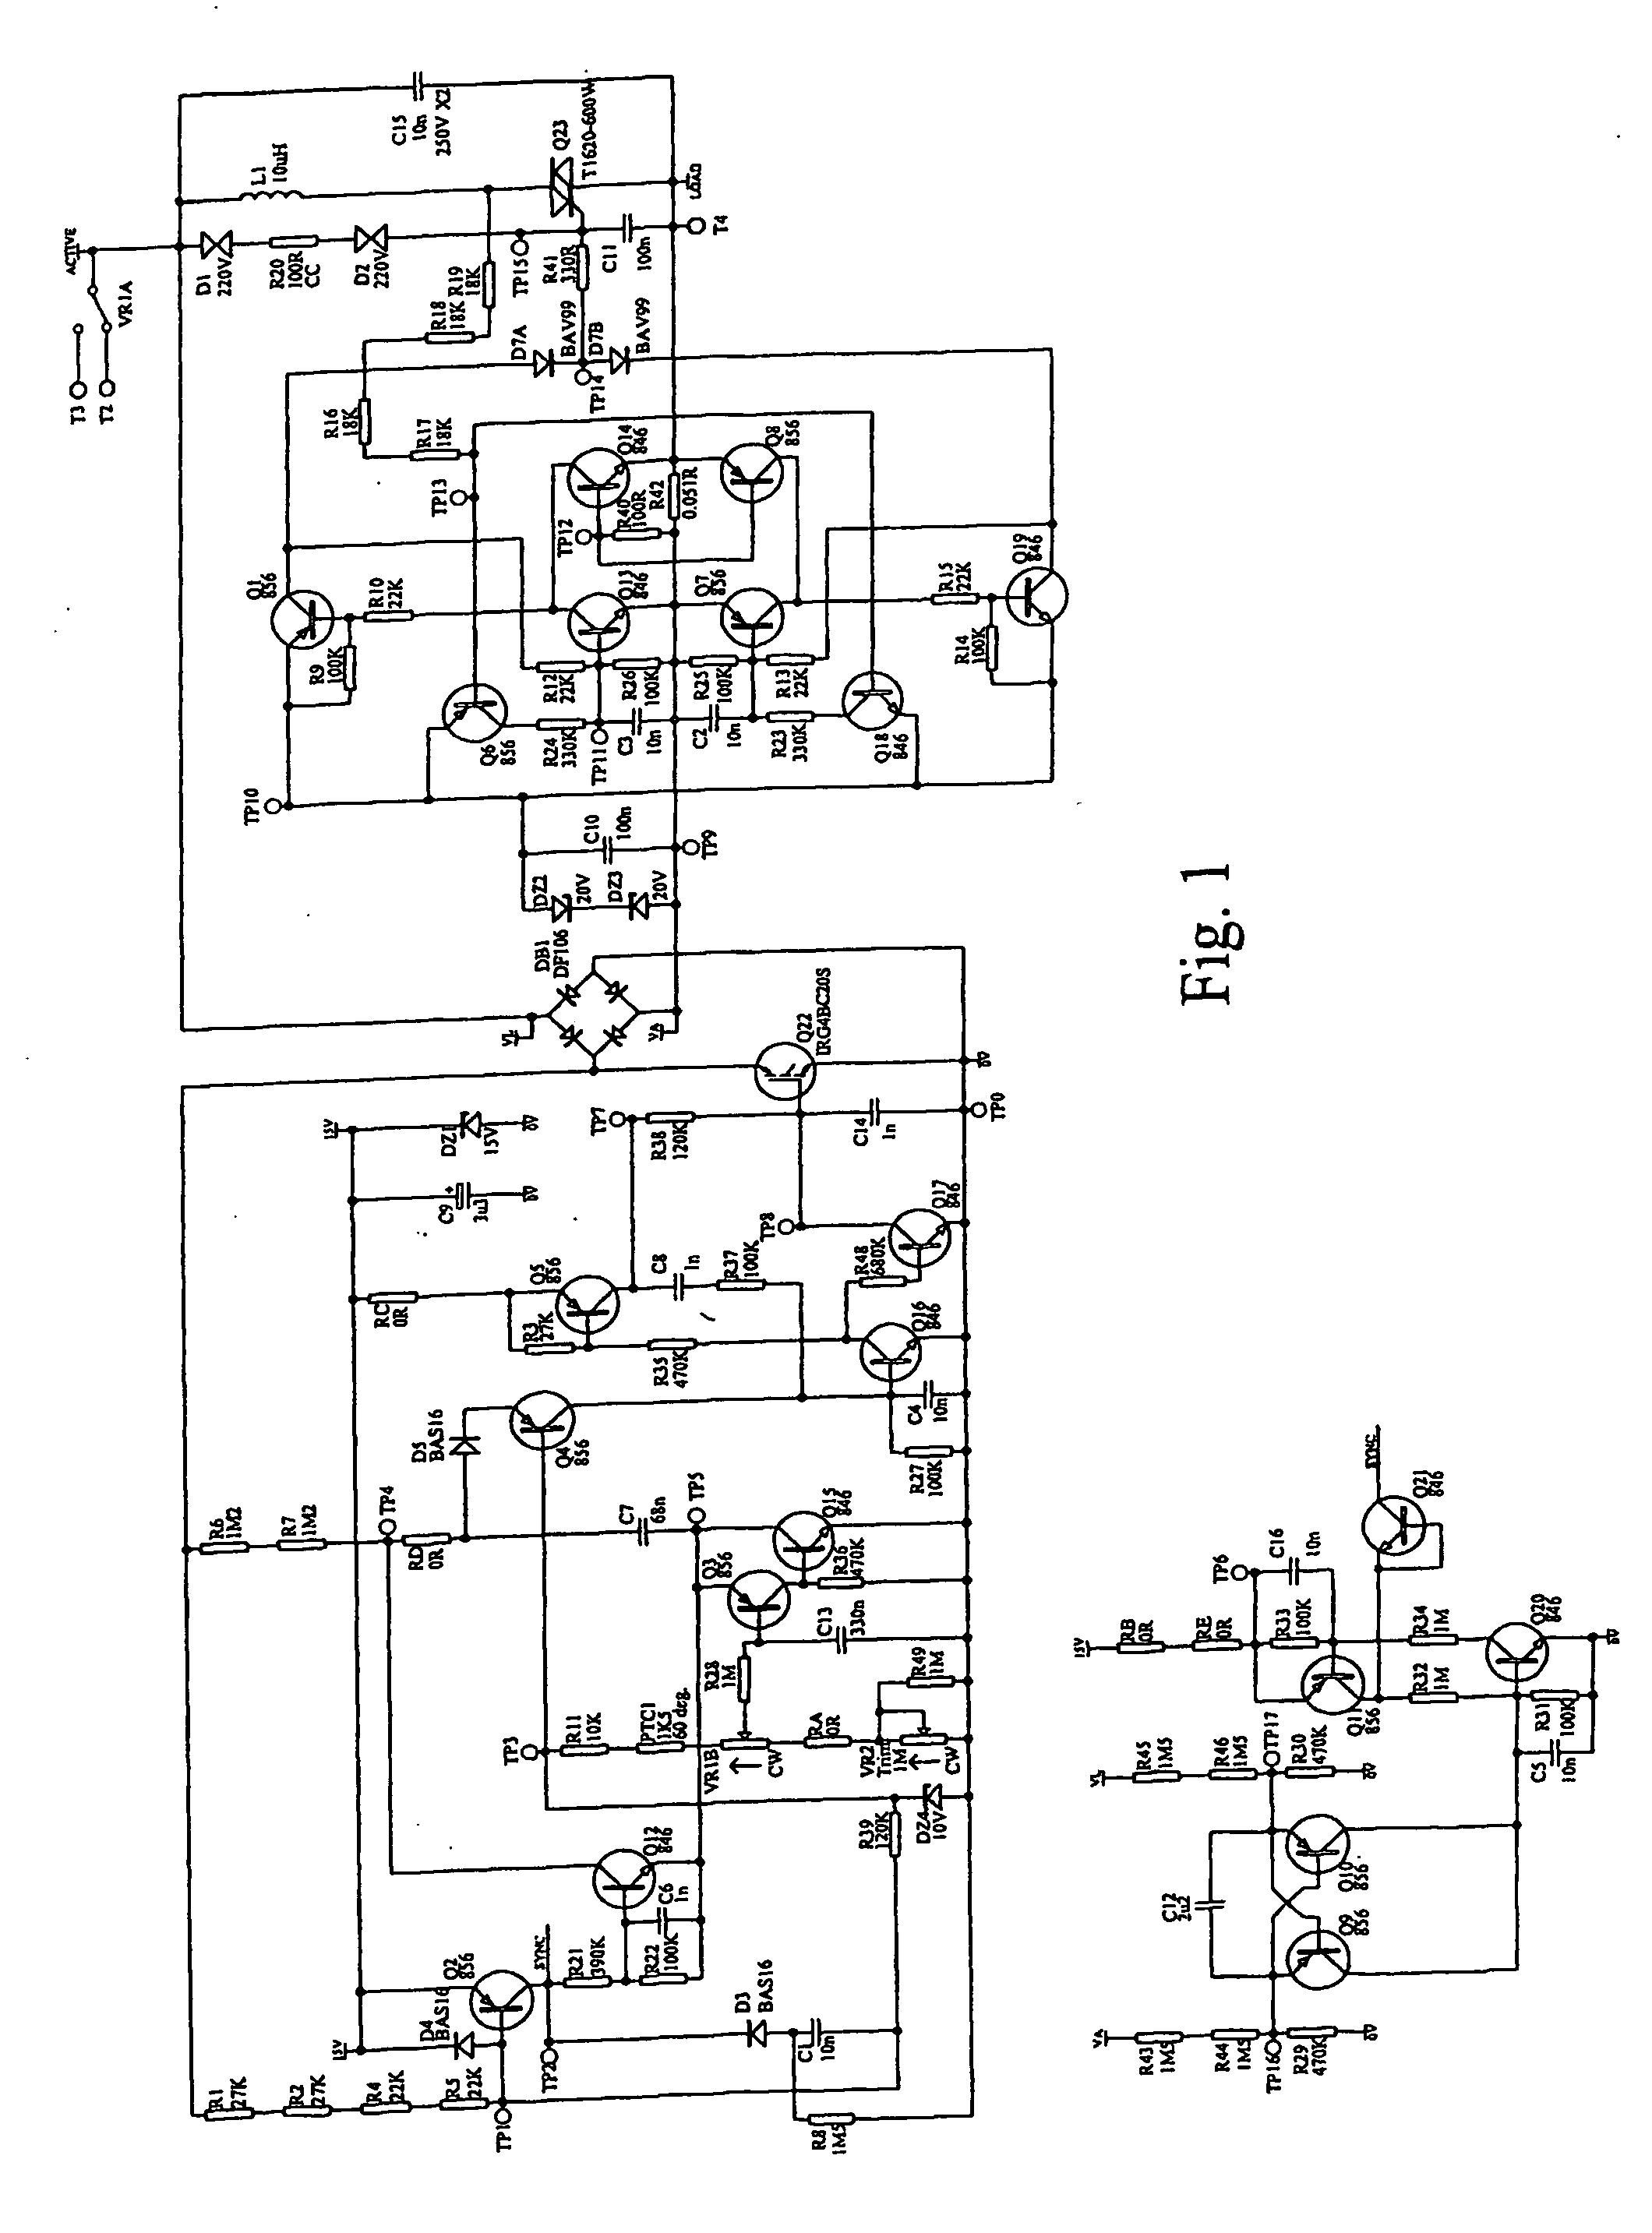 Dimmer circuit with improved ripple control